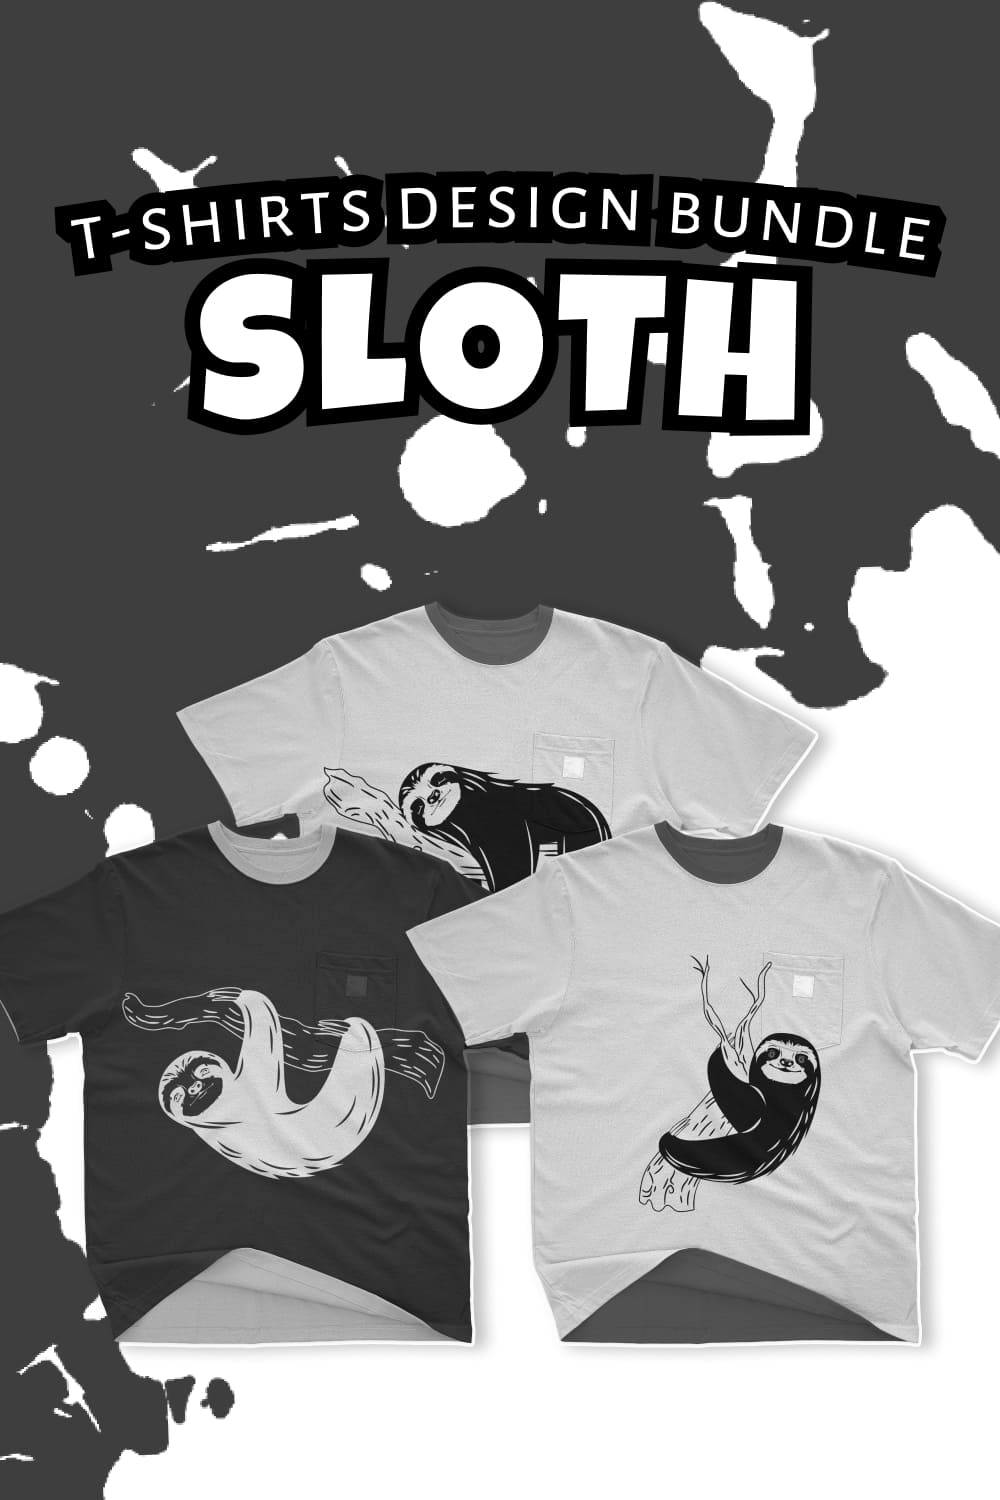 A selection of t-shirts featuring exquisite black and white sloth prints.